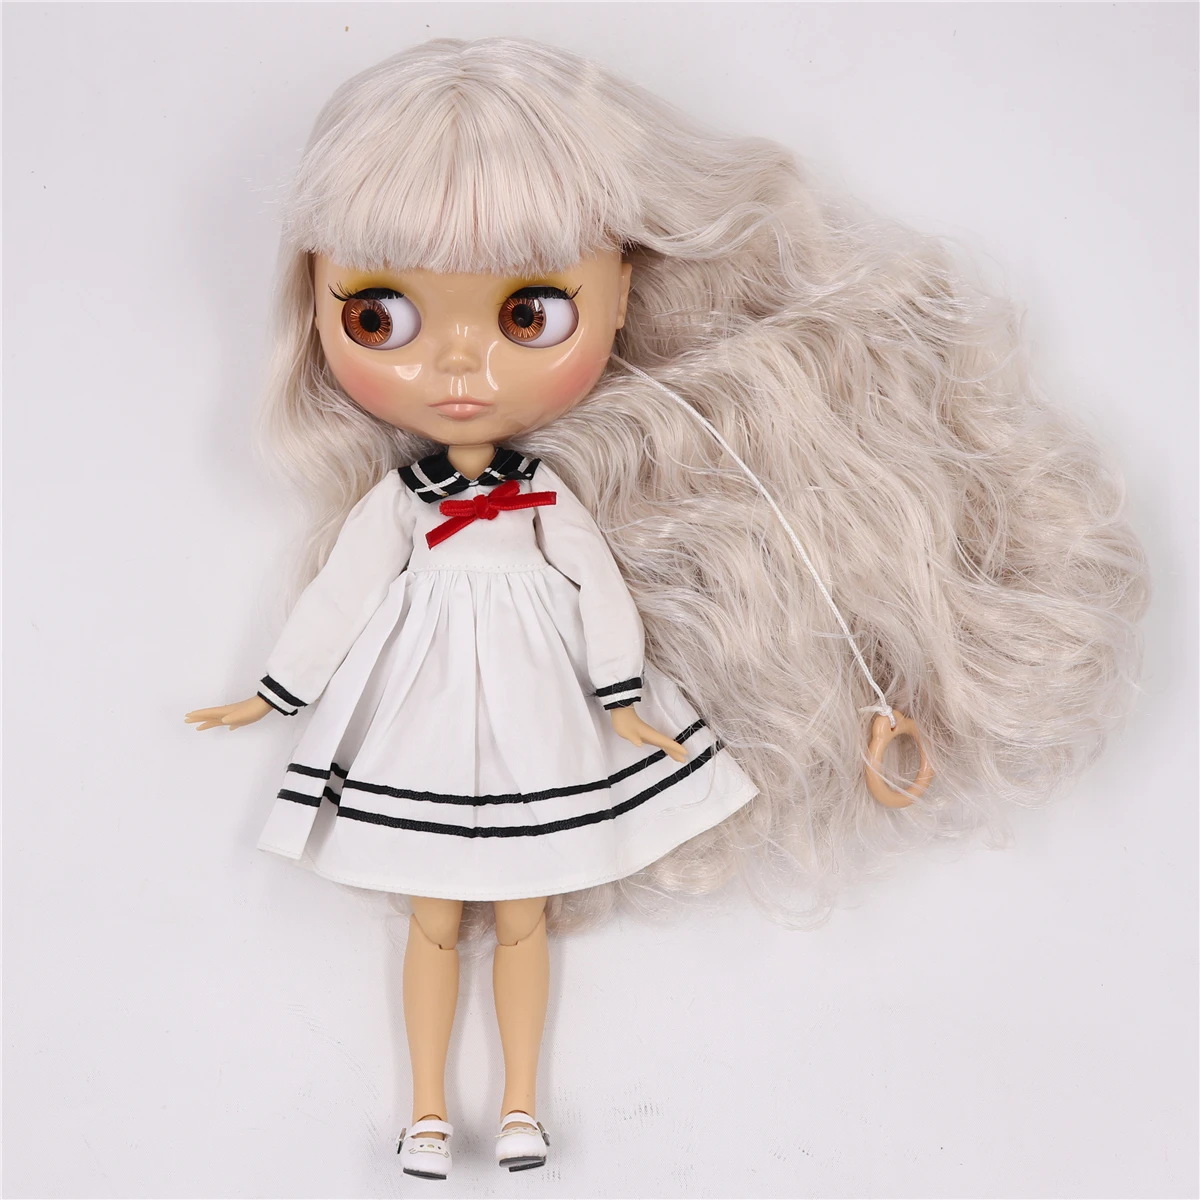 Neo Blythe Doll with Purple Hair, Tan Skin, Shiny Cute Face & Factory Jointed Body 2